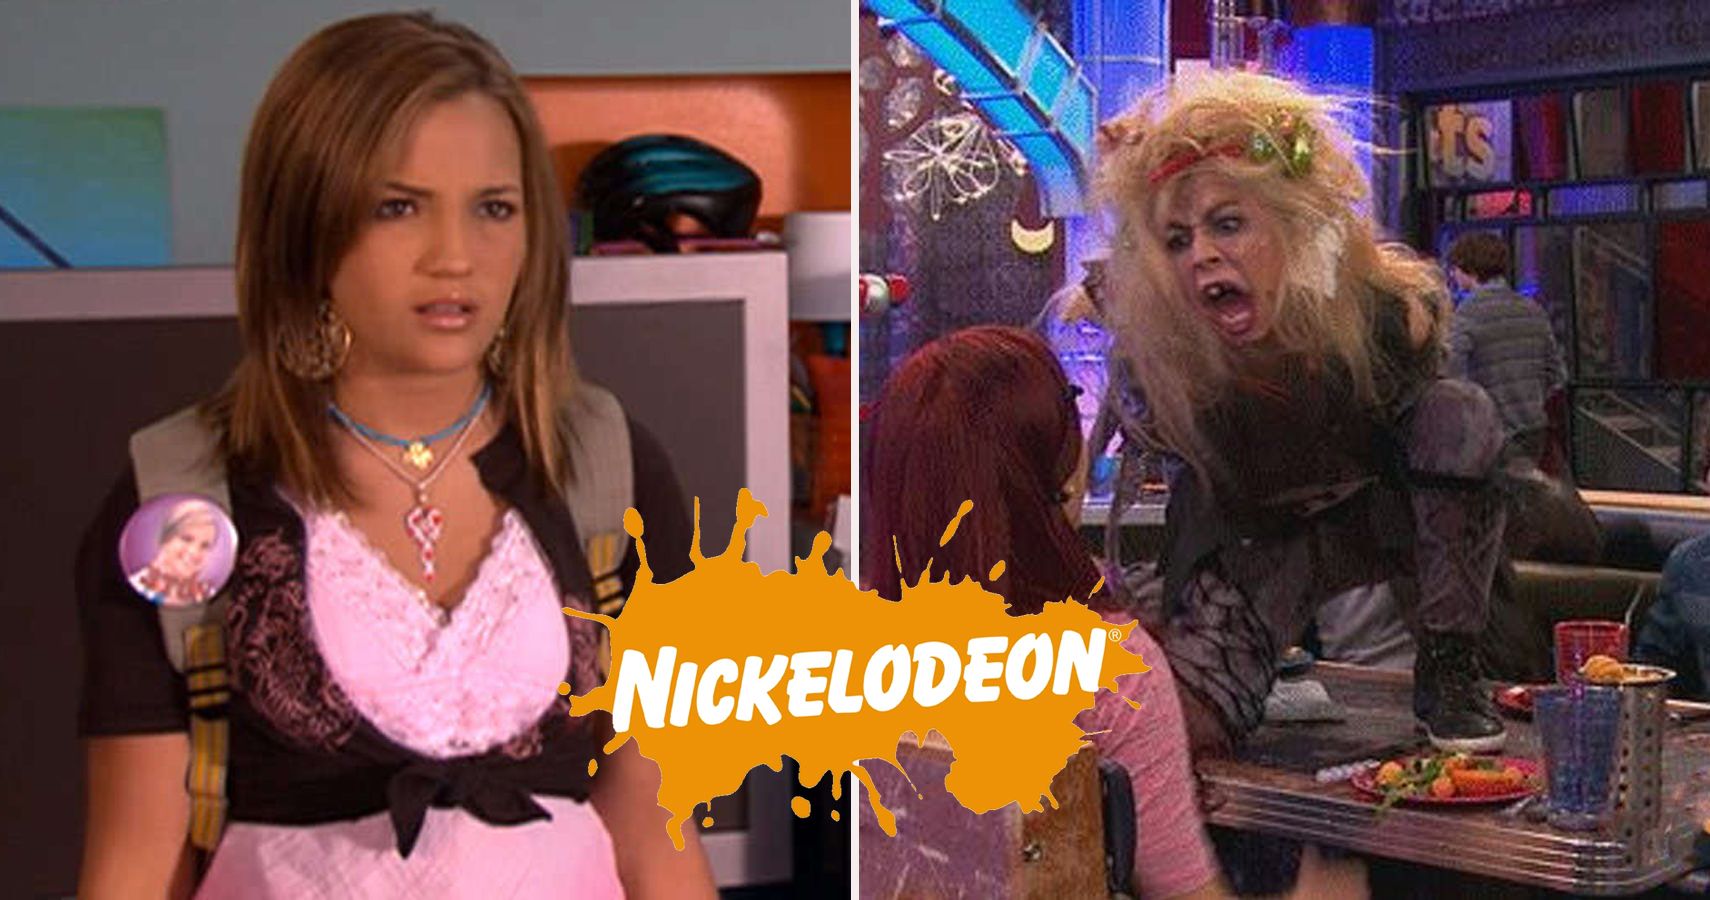 20 Nickelodeon Shows That Were Cancelled For Crazy Reasons